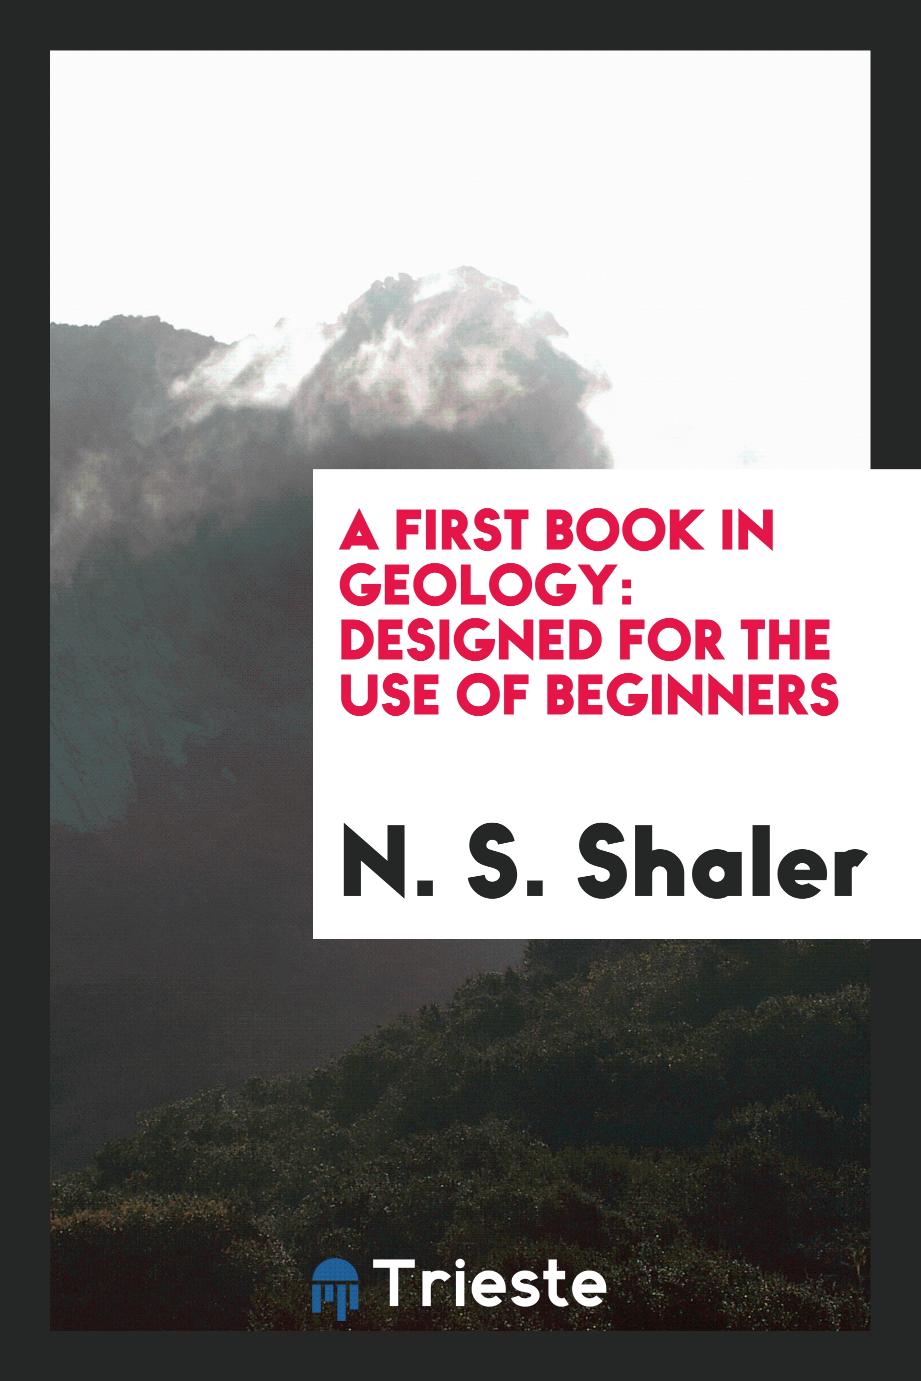 A first book in geology: designed for the use of beginners